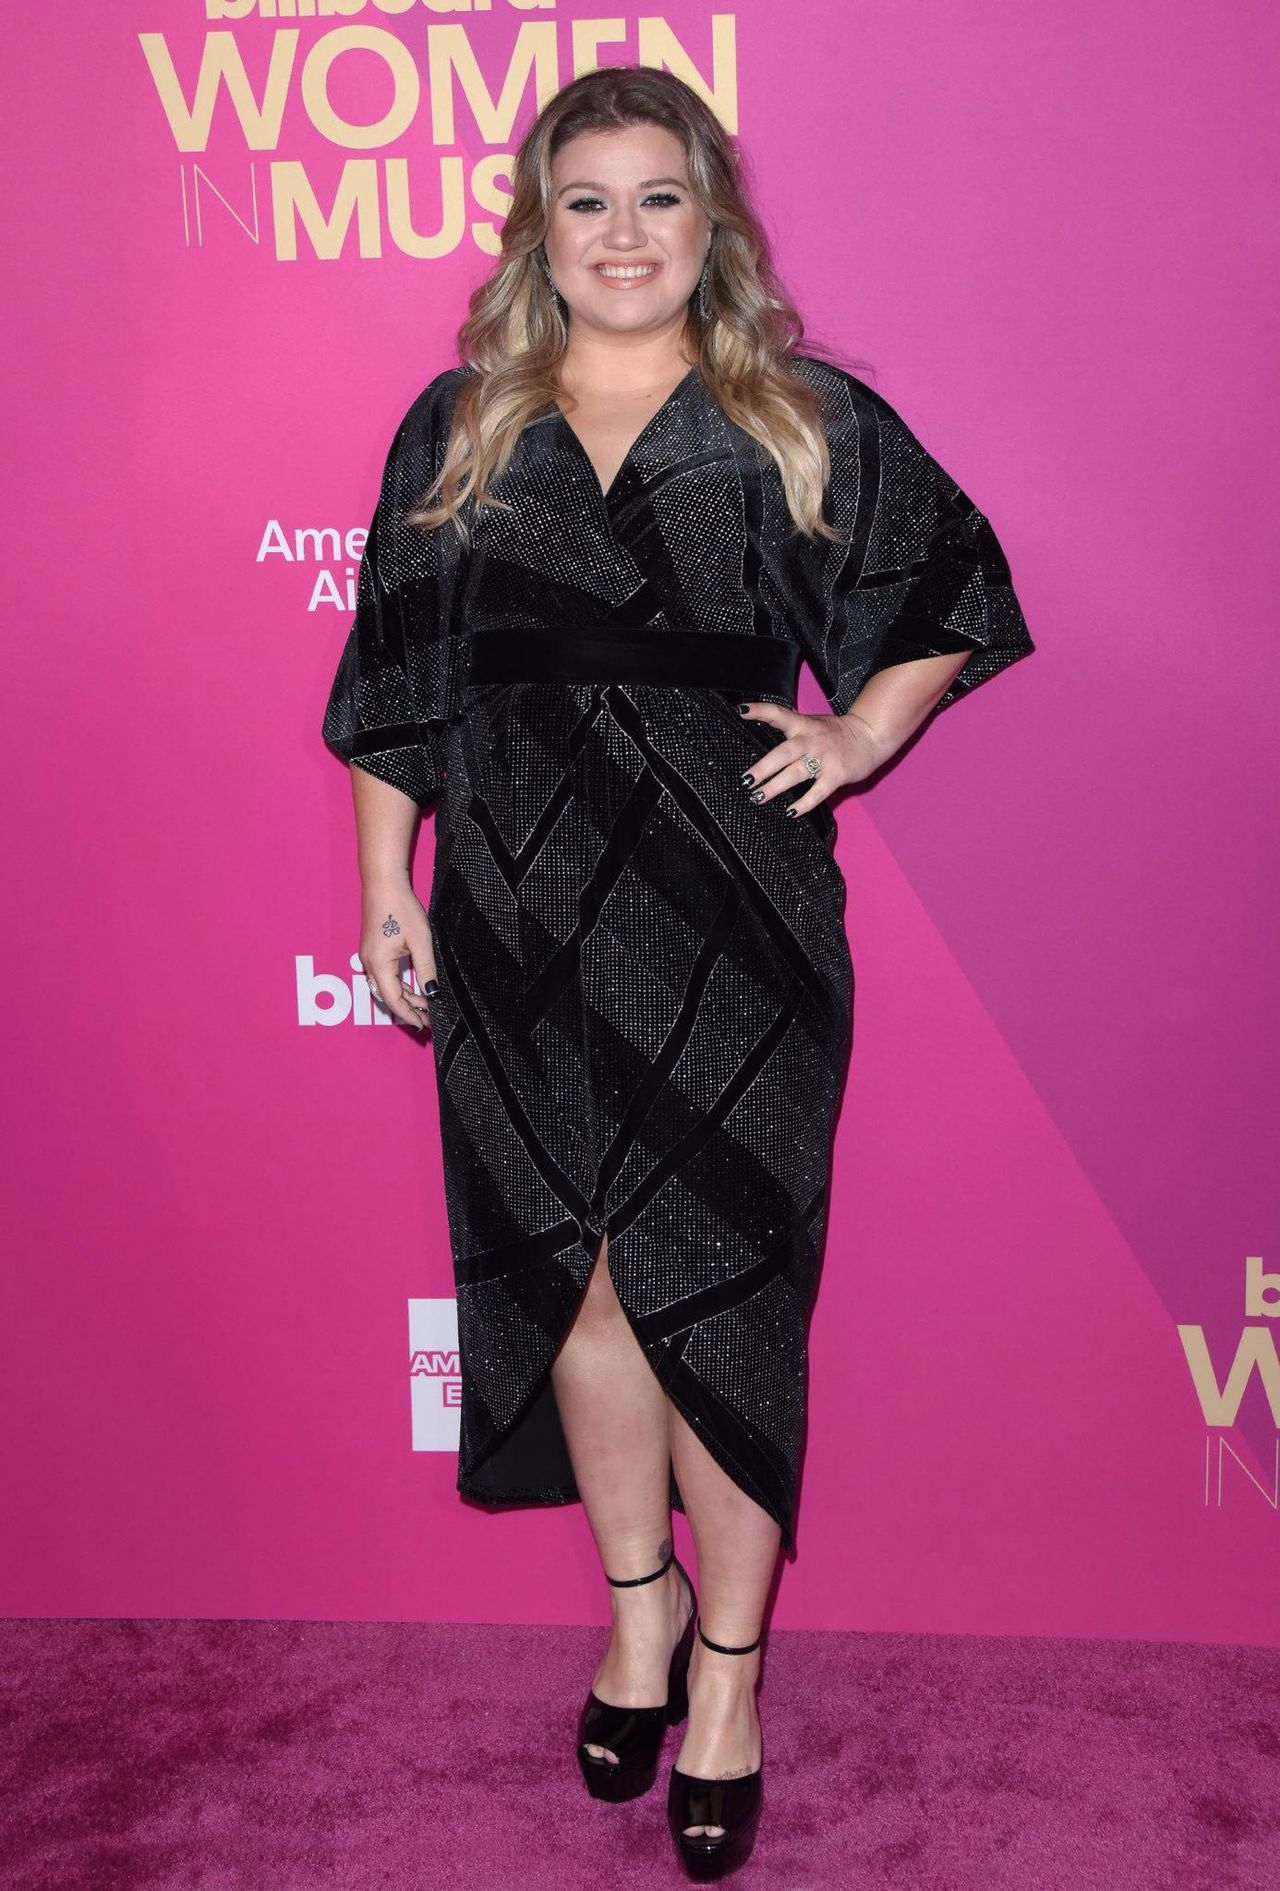 Kelly Clarkson przed przejściem na dietęKelly Clarkson at the Billboard Women in Music 2017 event at the Ray Dolby Ballroom on November 30, 2017 in Hollywood, CA.
© O'Connor/AFF-USA.com